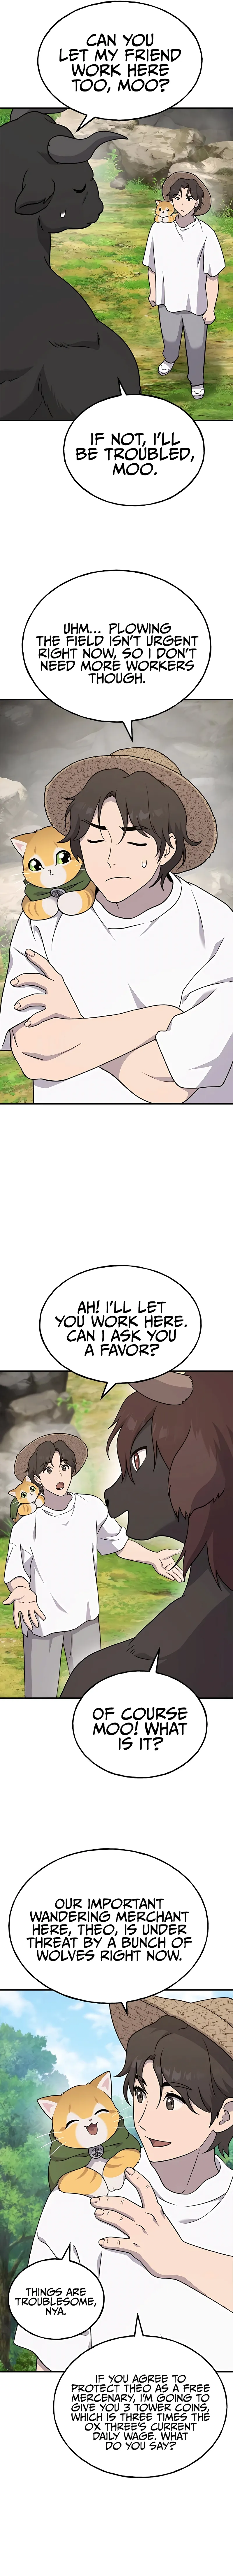 Solo Farming In The Tower Chapter 42 page 10